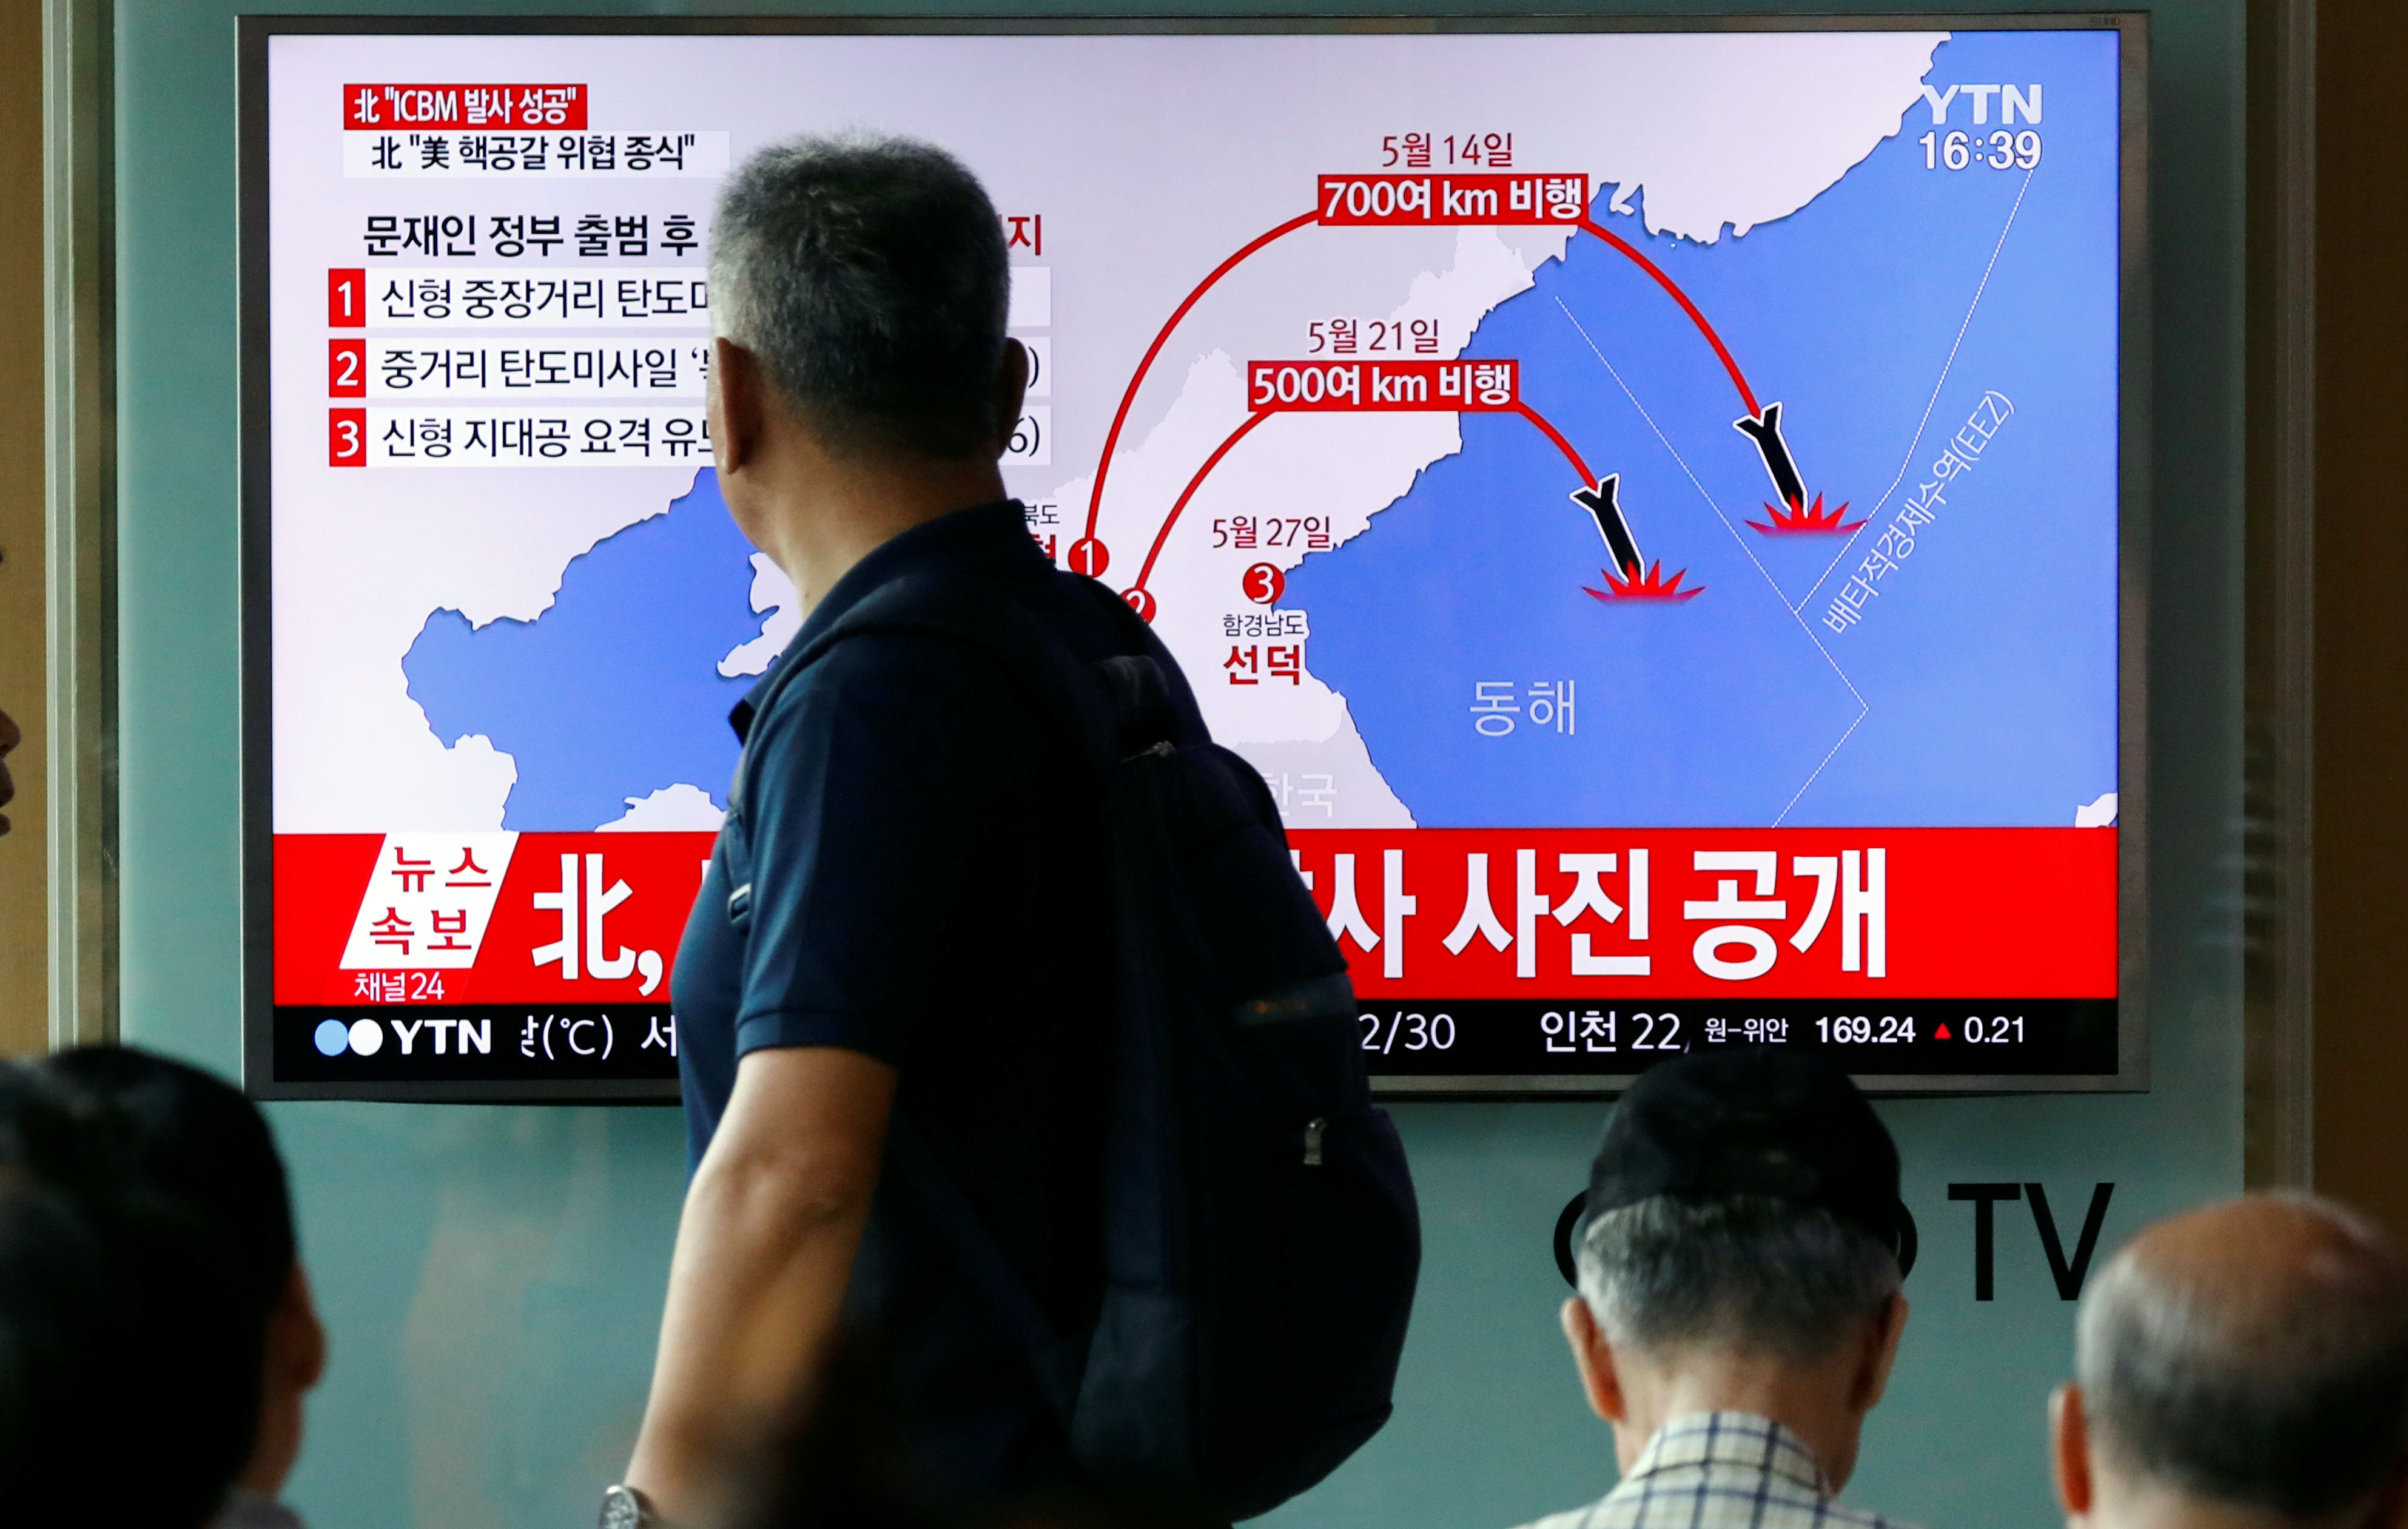 A man walks past a TV broadcasting a news report on North Korea's the Hwasong-14 missile, a new intercontinental ballistic missile at a railway station in Seoul